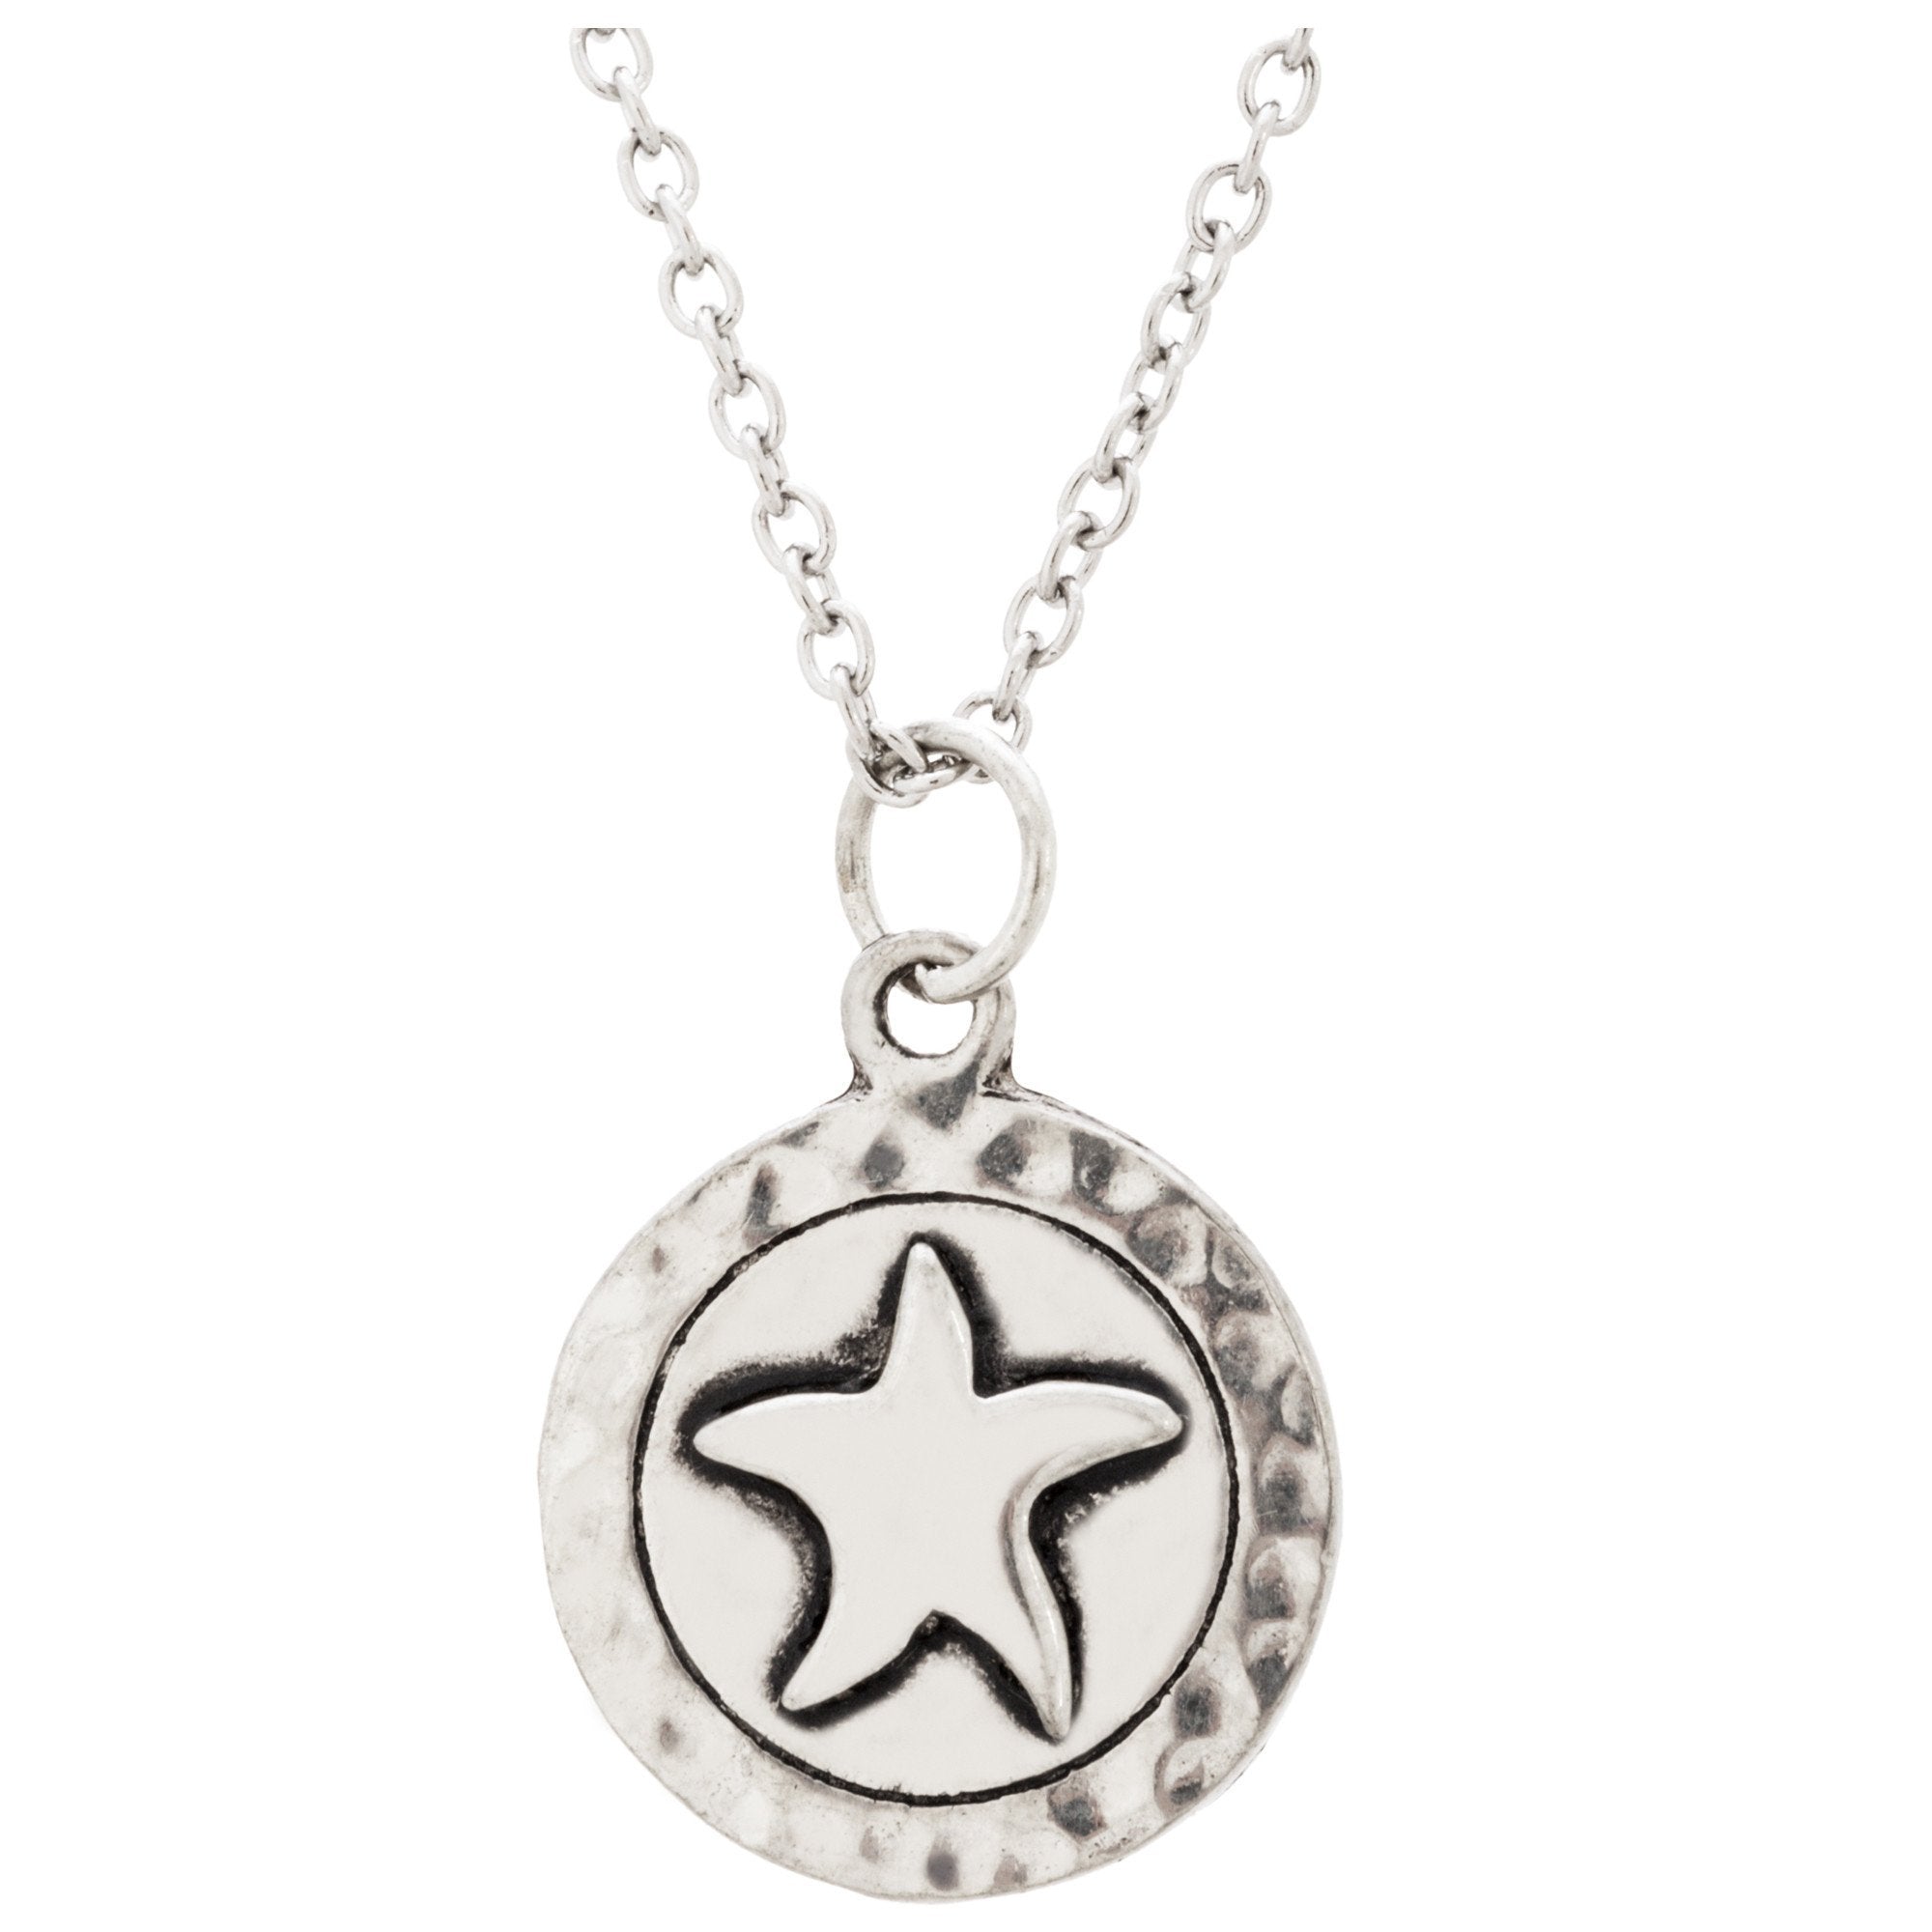 Life At Sea Sterling Necklace - Starfish